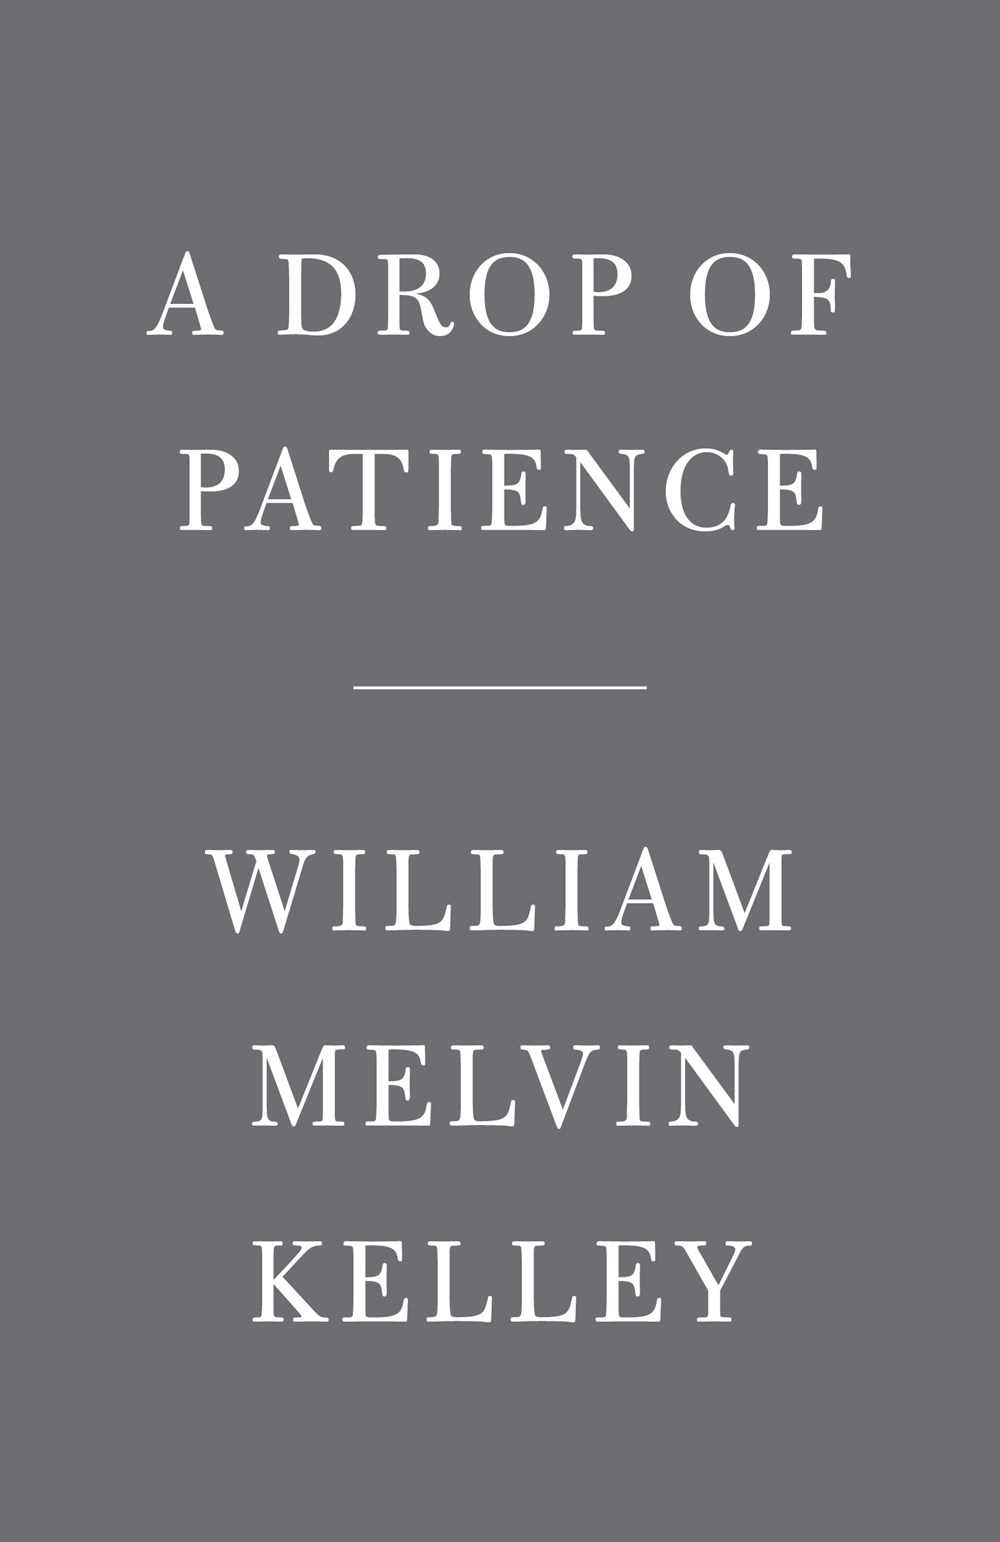 A Drop of Patience